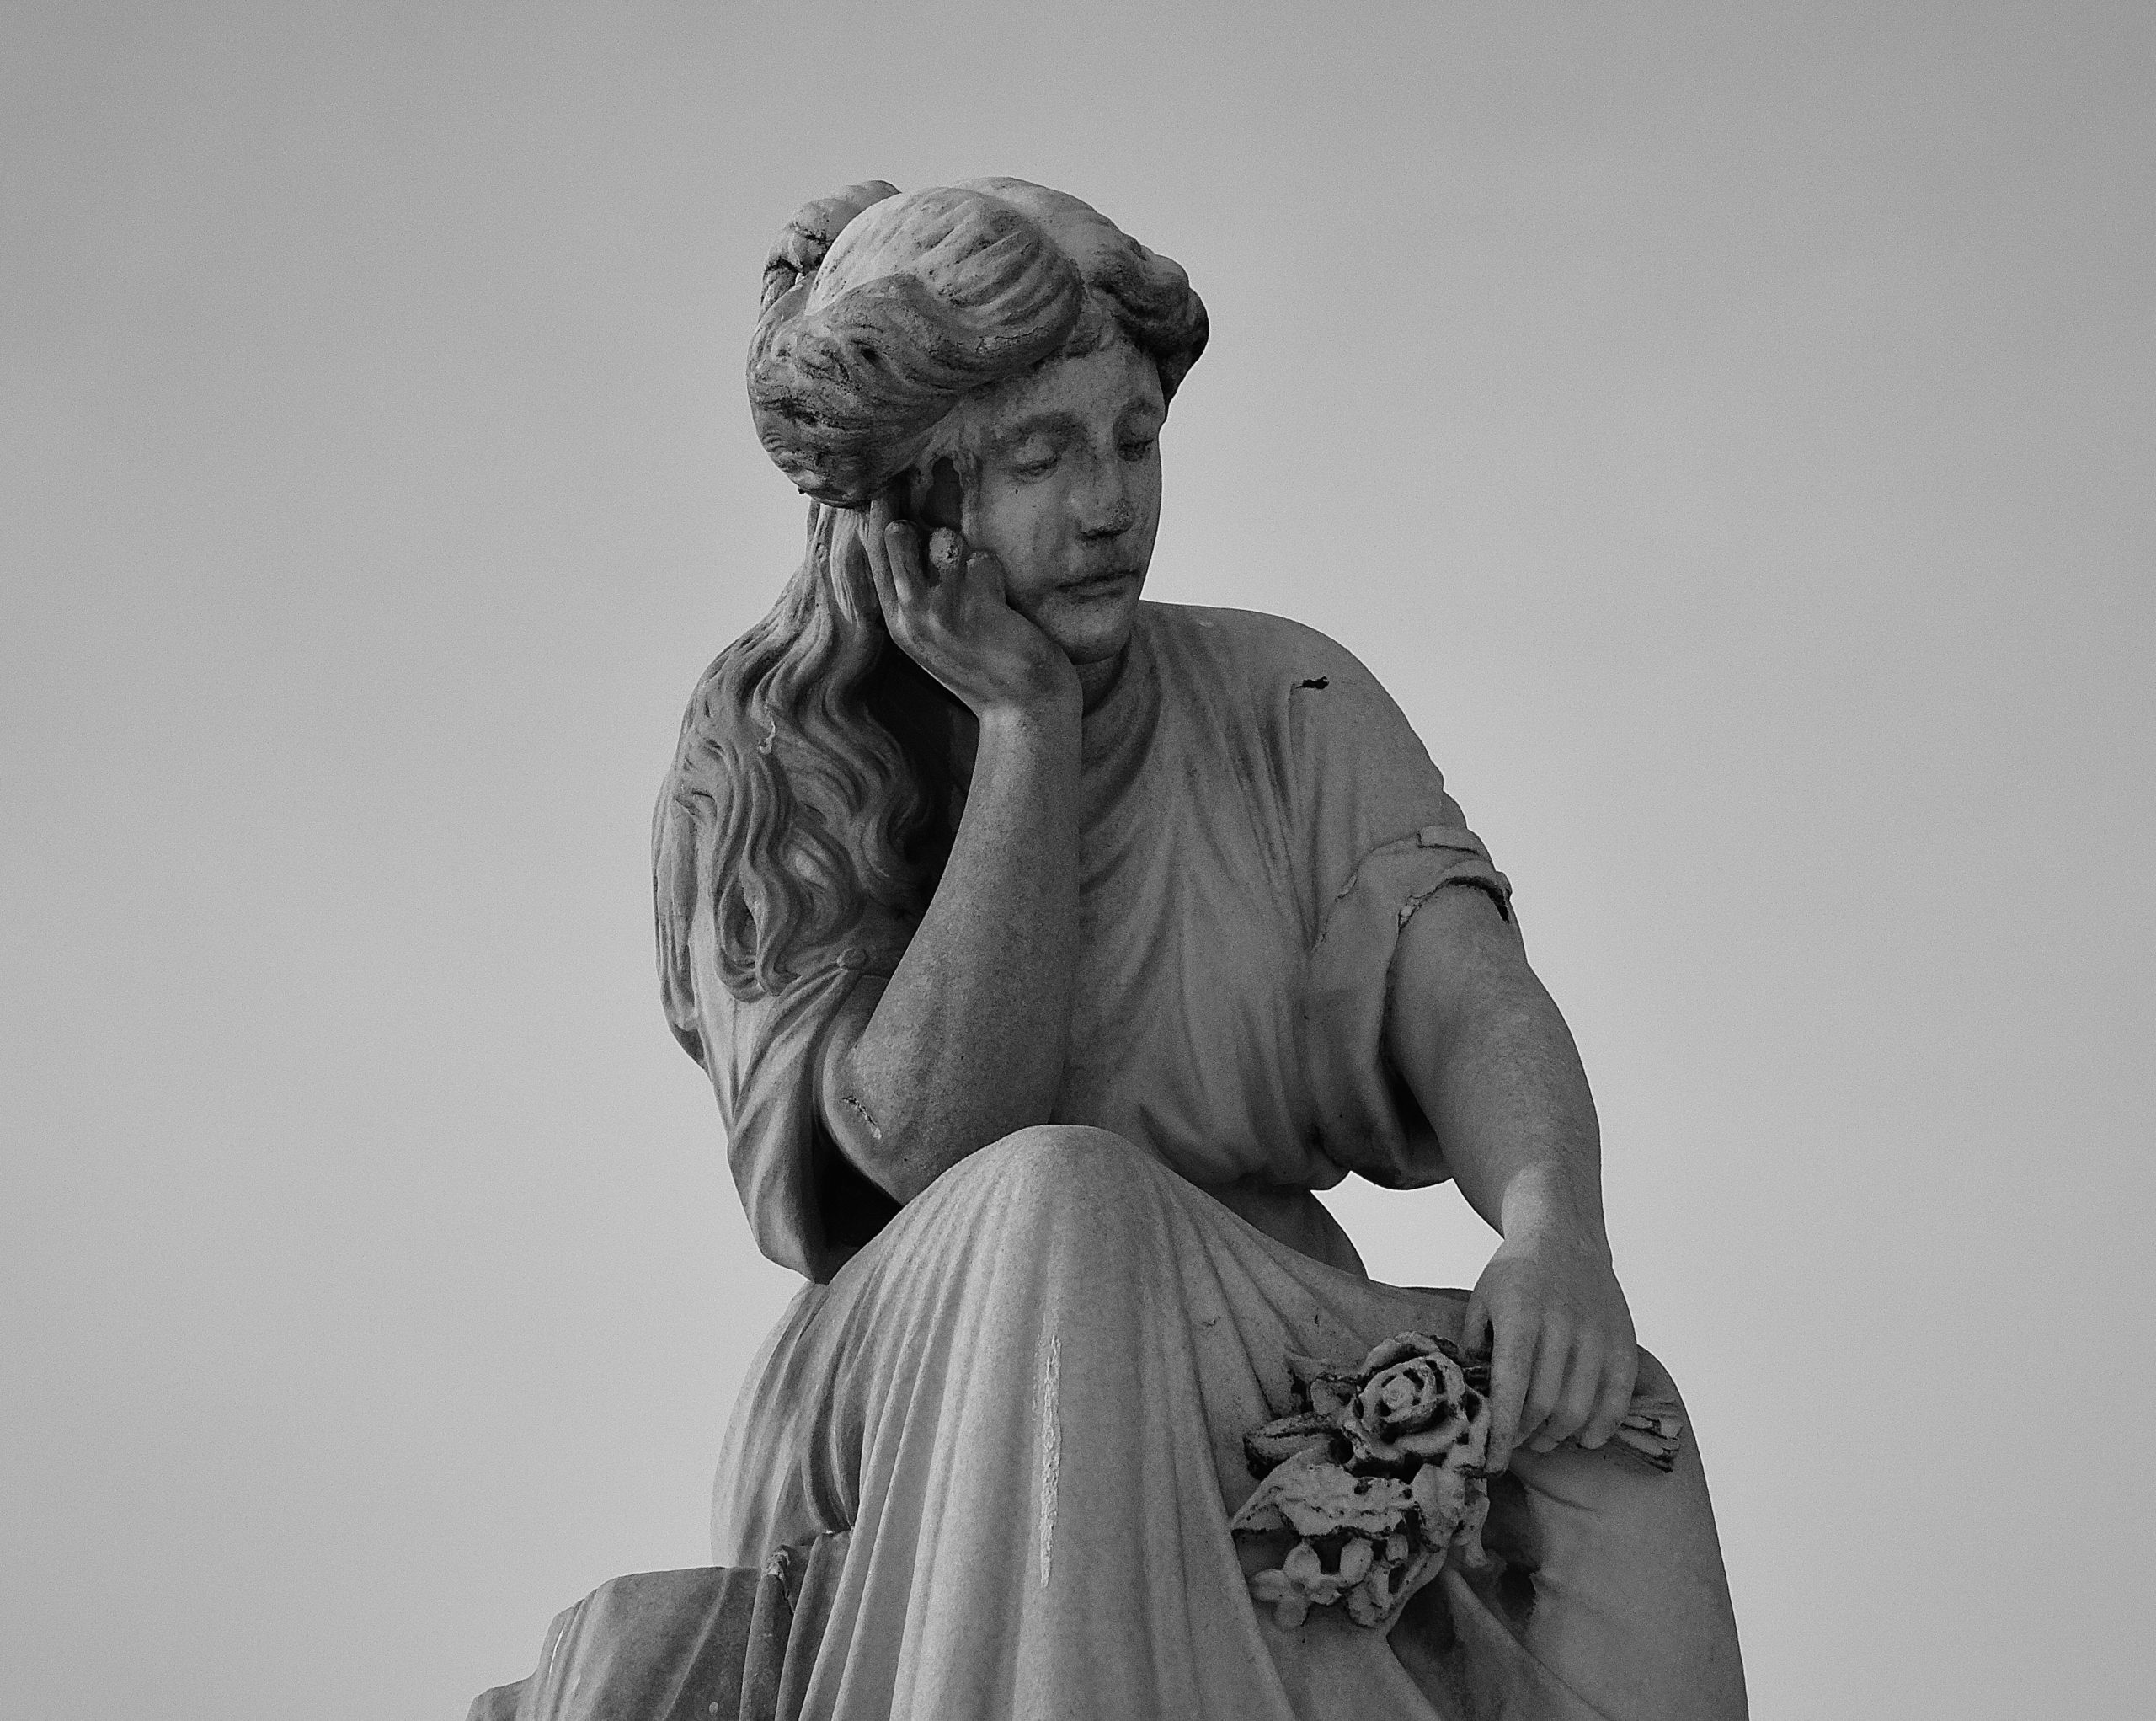 Sometimes life is hard like for the marble statue in this photo, mourning her loss, and we need to take a breath.